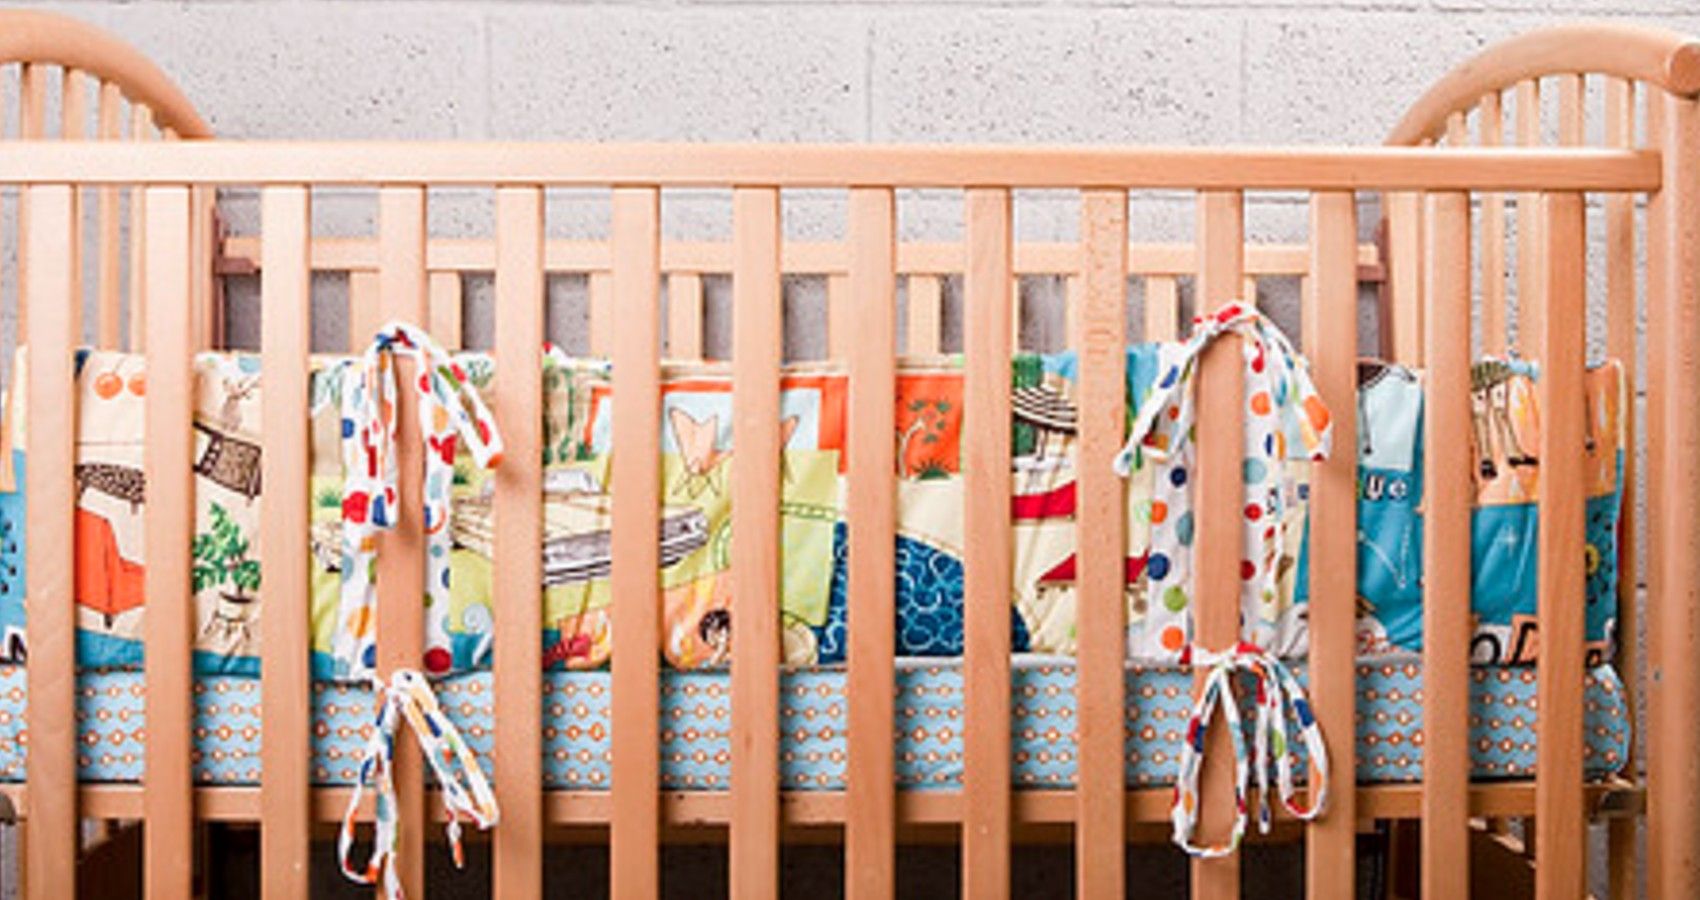 A Bill Was Passed That Would Ban Inclined Sleepers & Crib Bumpers